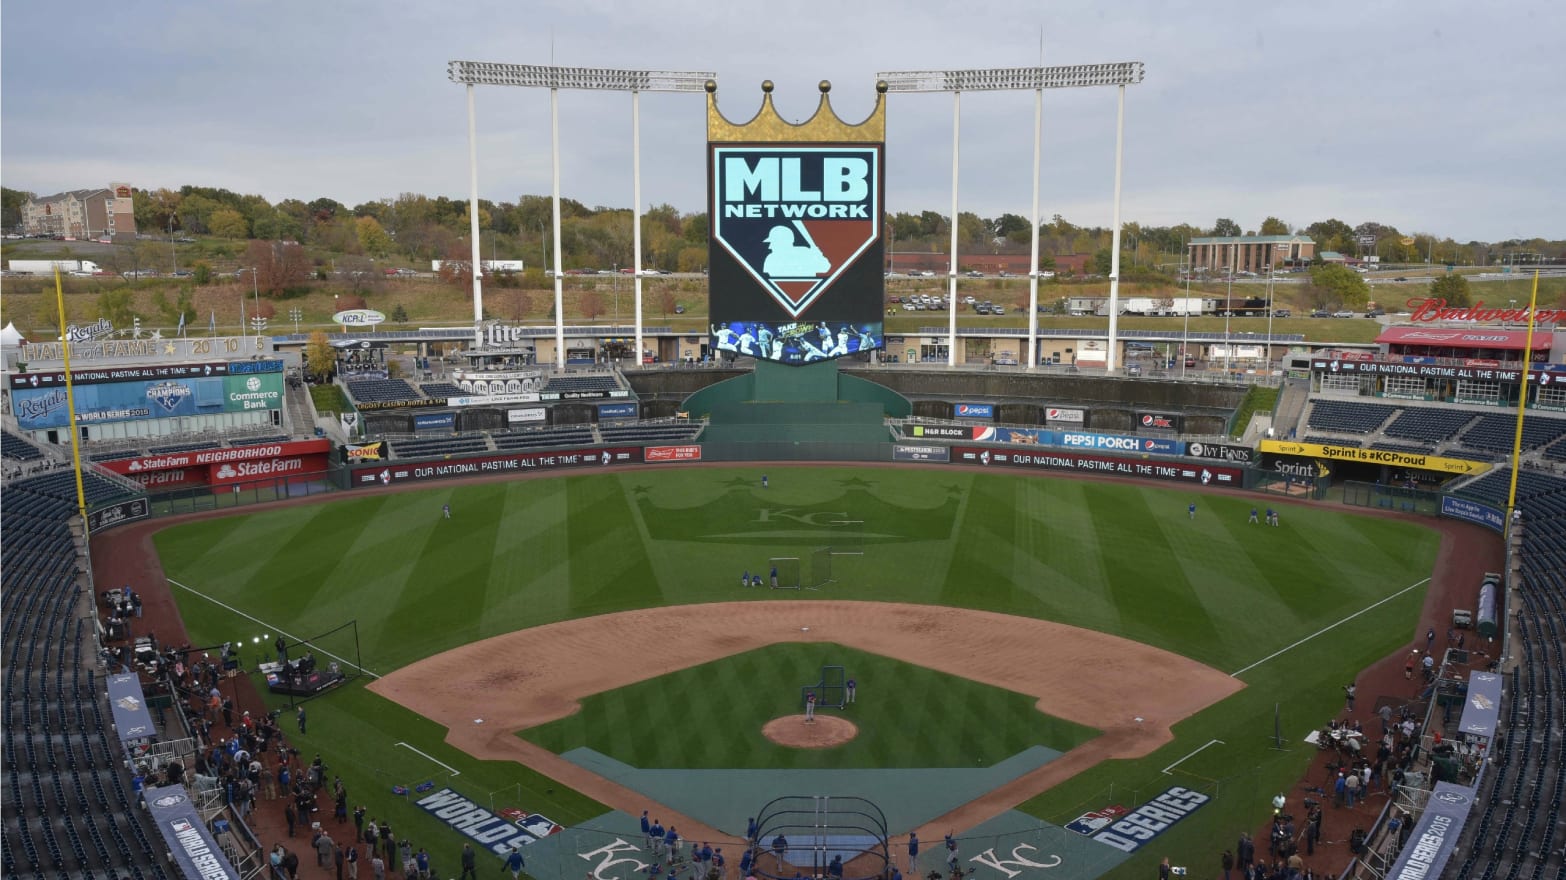 How to Watch the 2015 World Series Live Stream Online